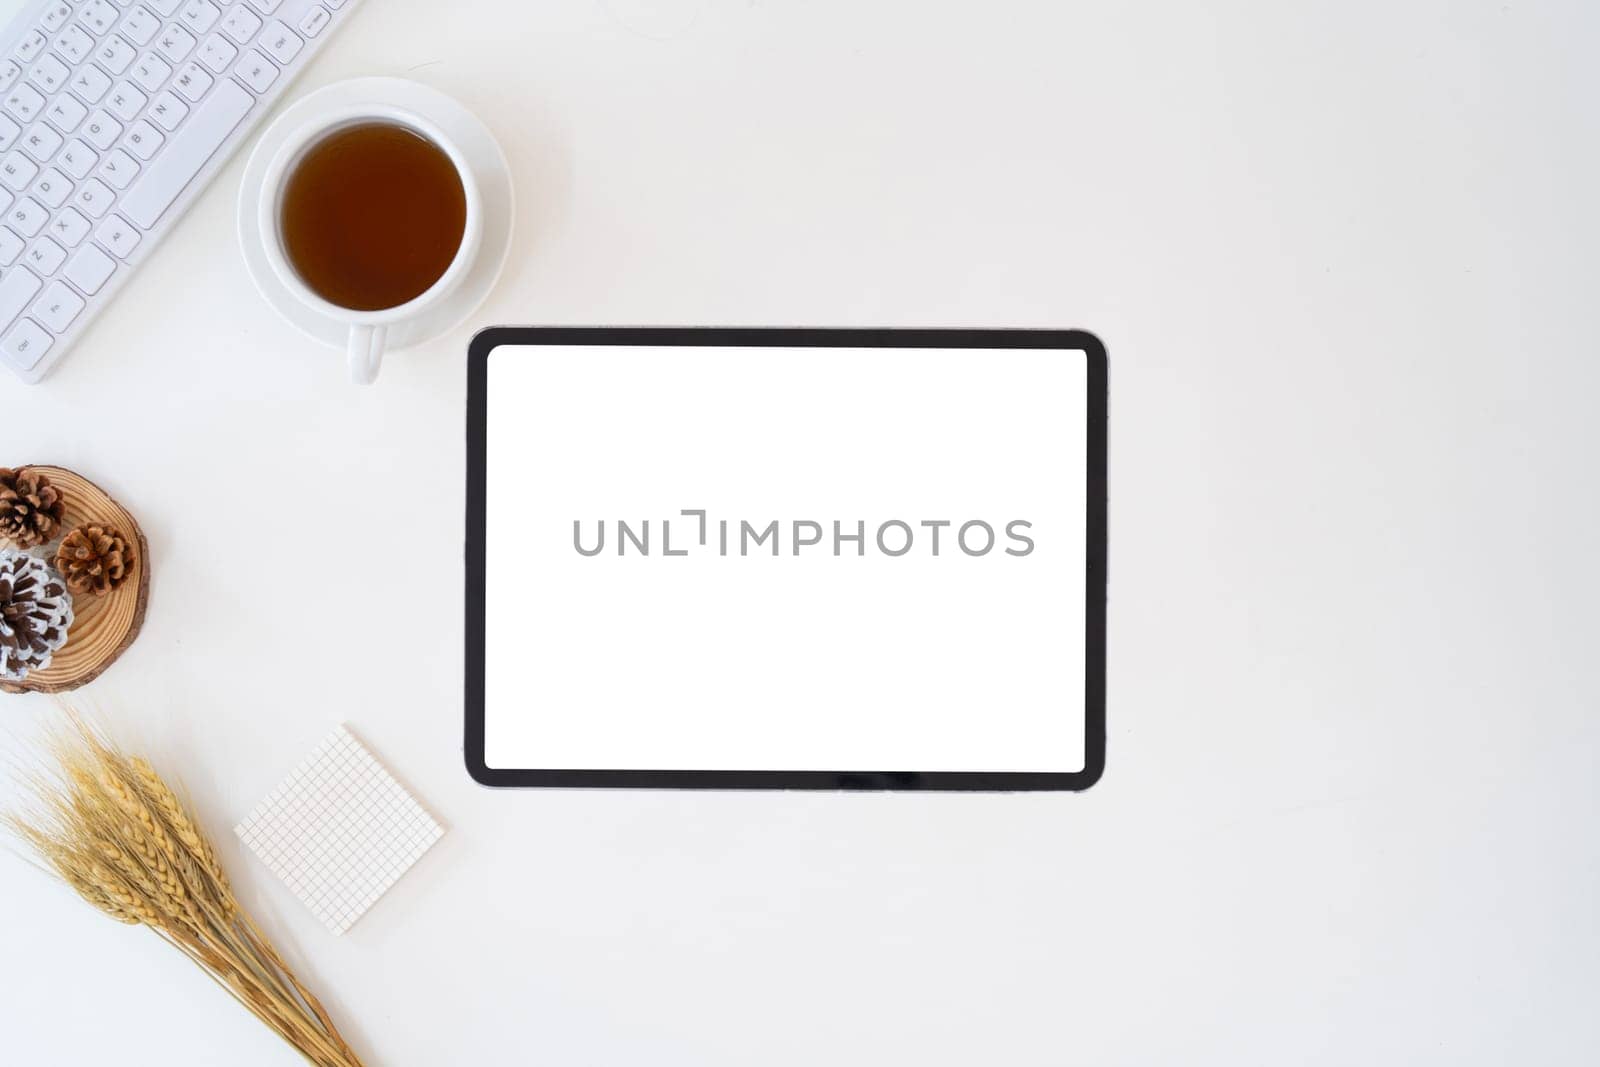 Modern desk workspace with blank copy space mockup with blank screen tablet, coffee cup, technology, headphones with equipment other office top view freelance business concept for social media.